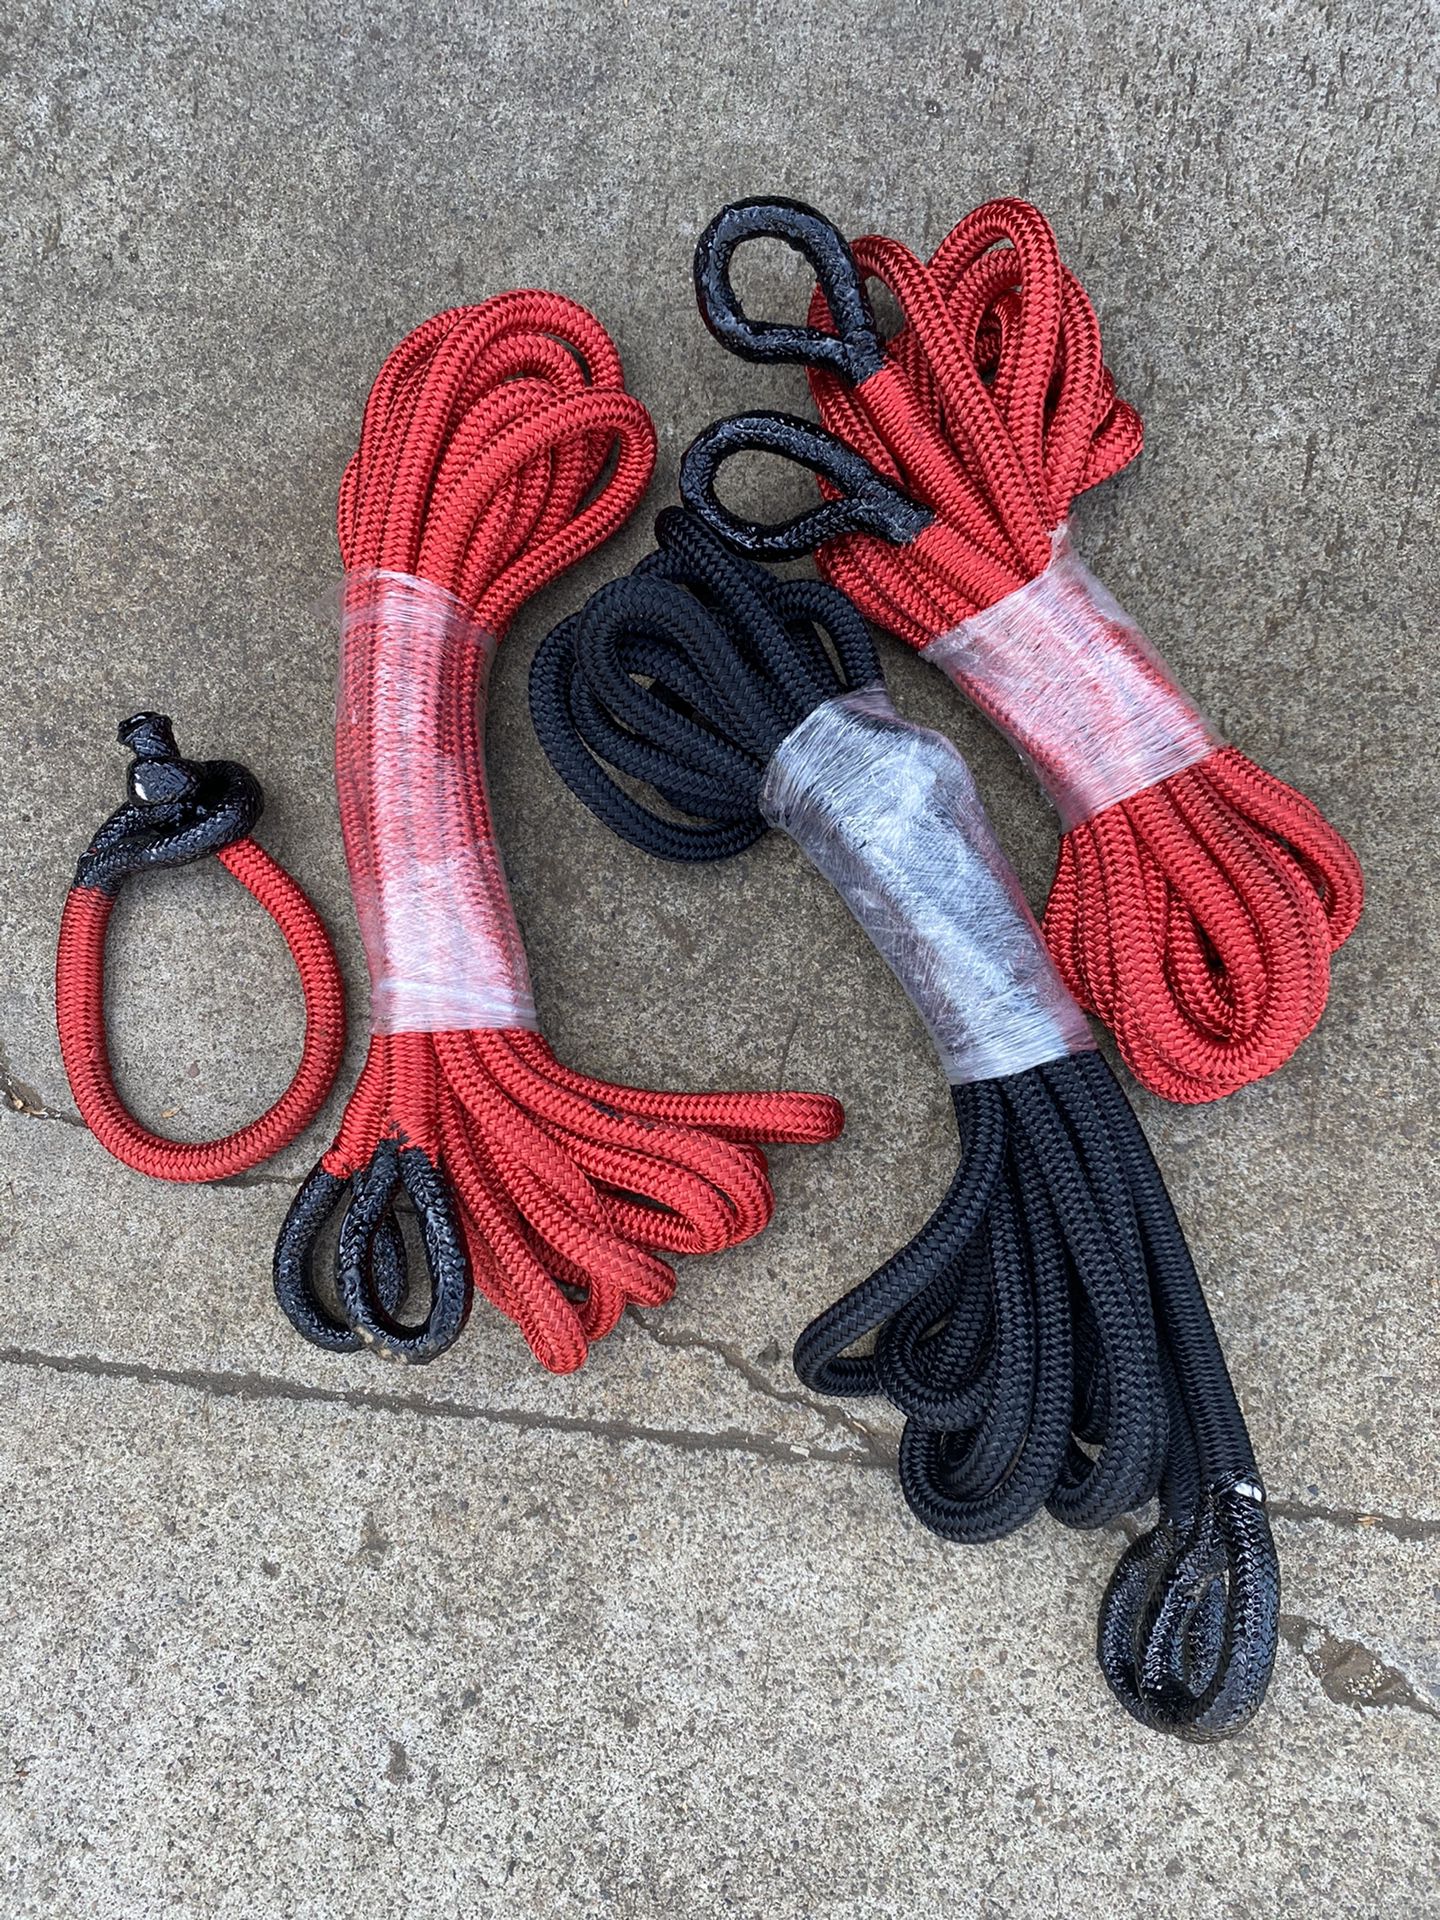 Off road recovery rope